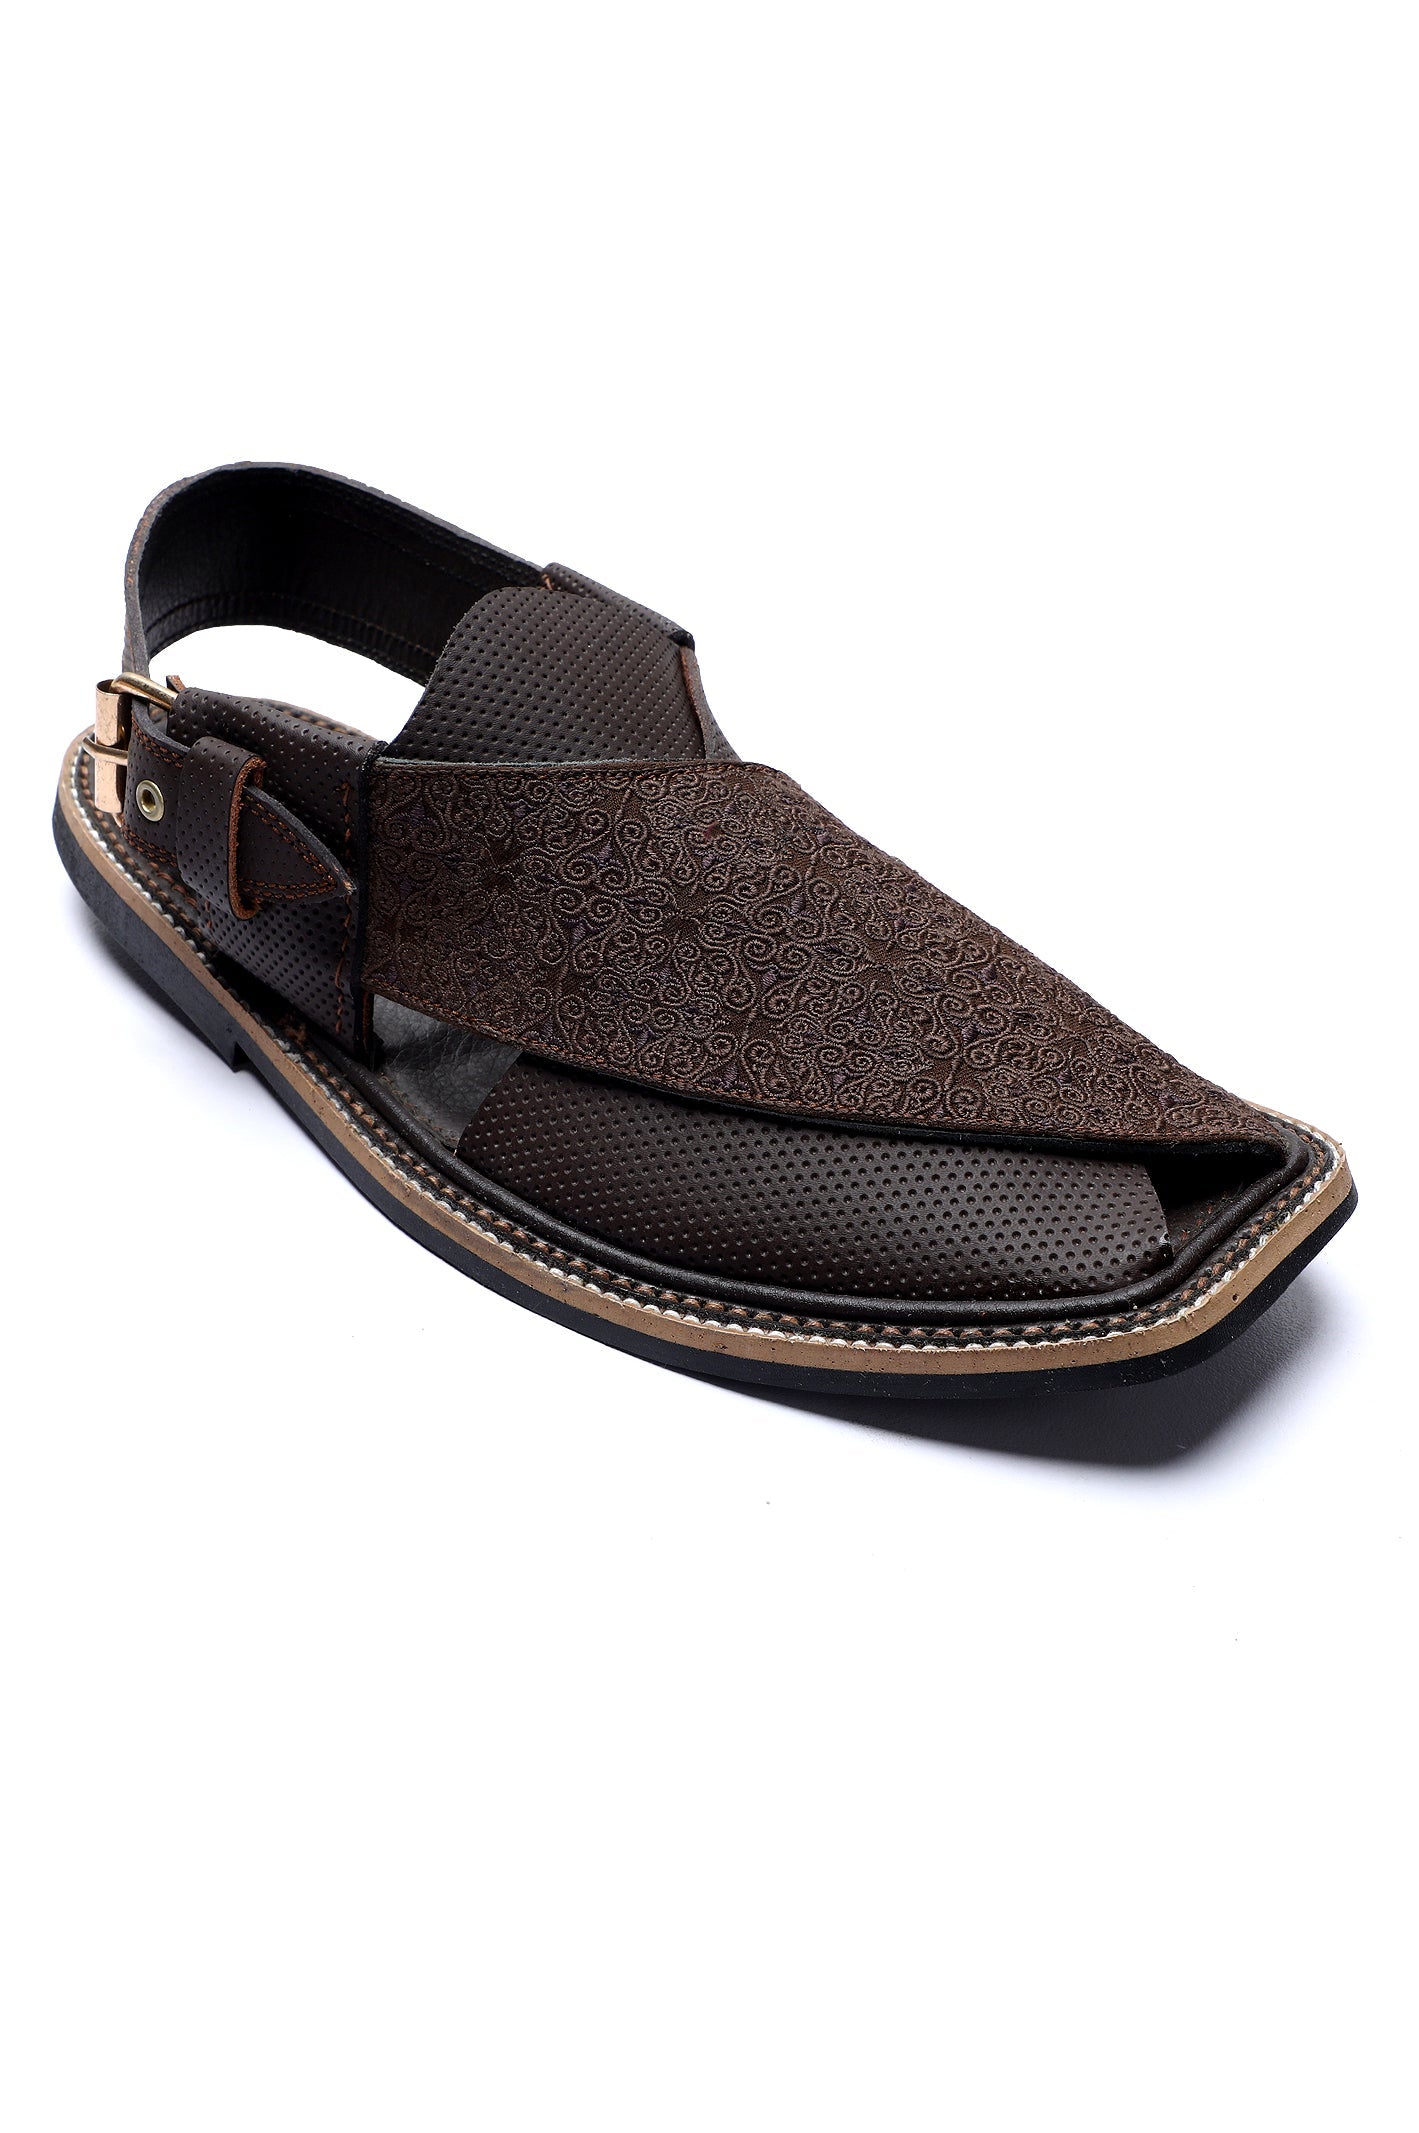 French Emporio Men's Sandal SKU: PSLD-0031-COFFEE - Diners